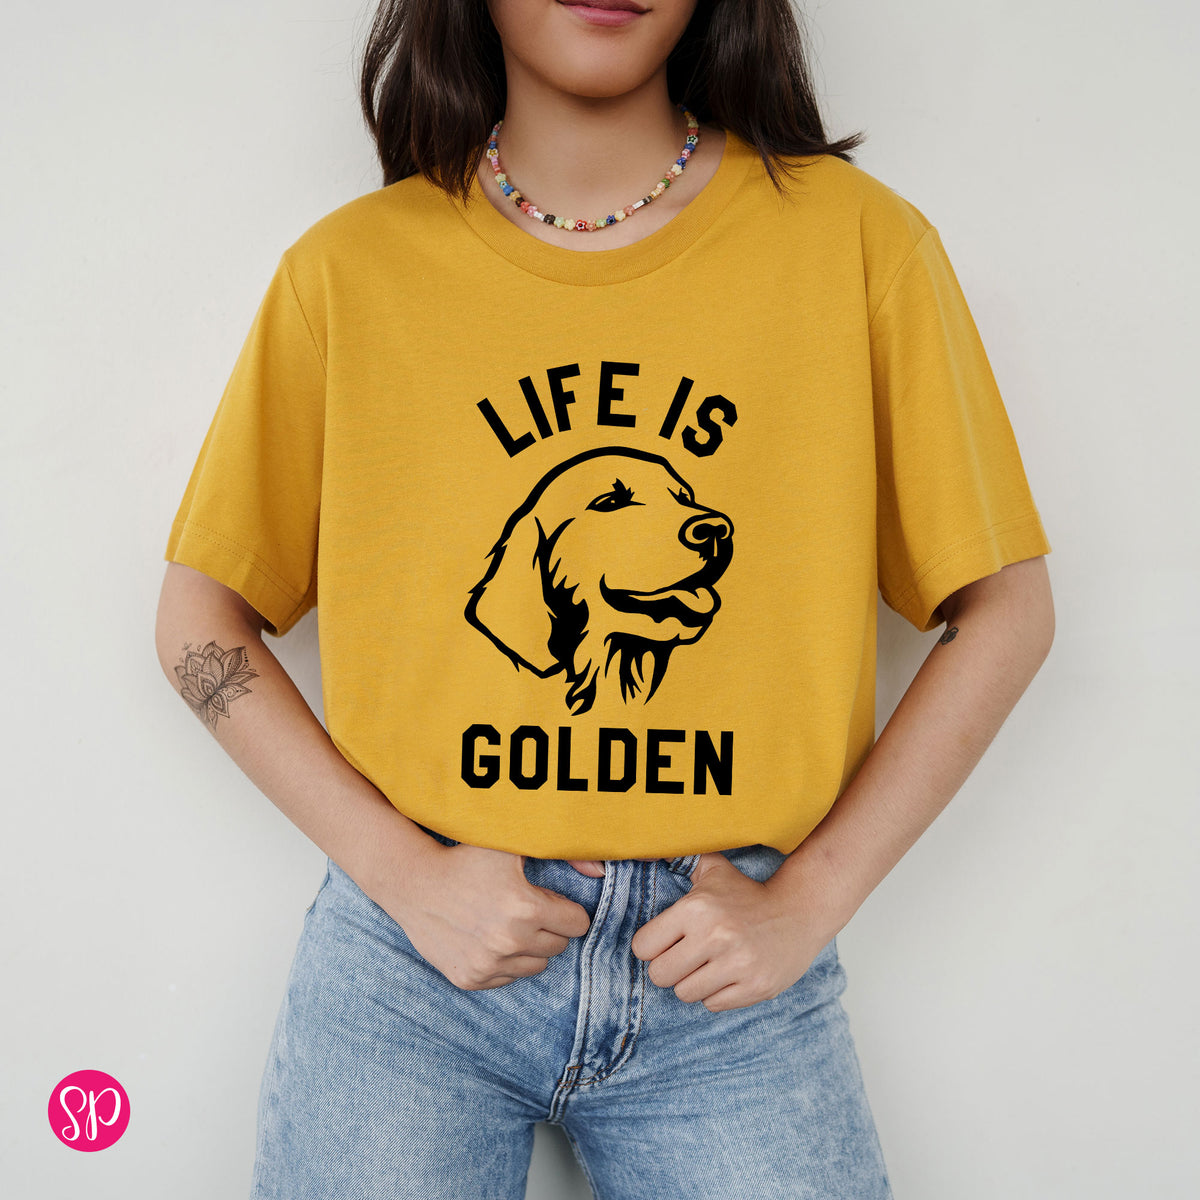 Life is Golden Retriever Funny Dog T-Shirt for Pet Lover Graphic Tee Shirt